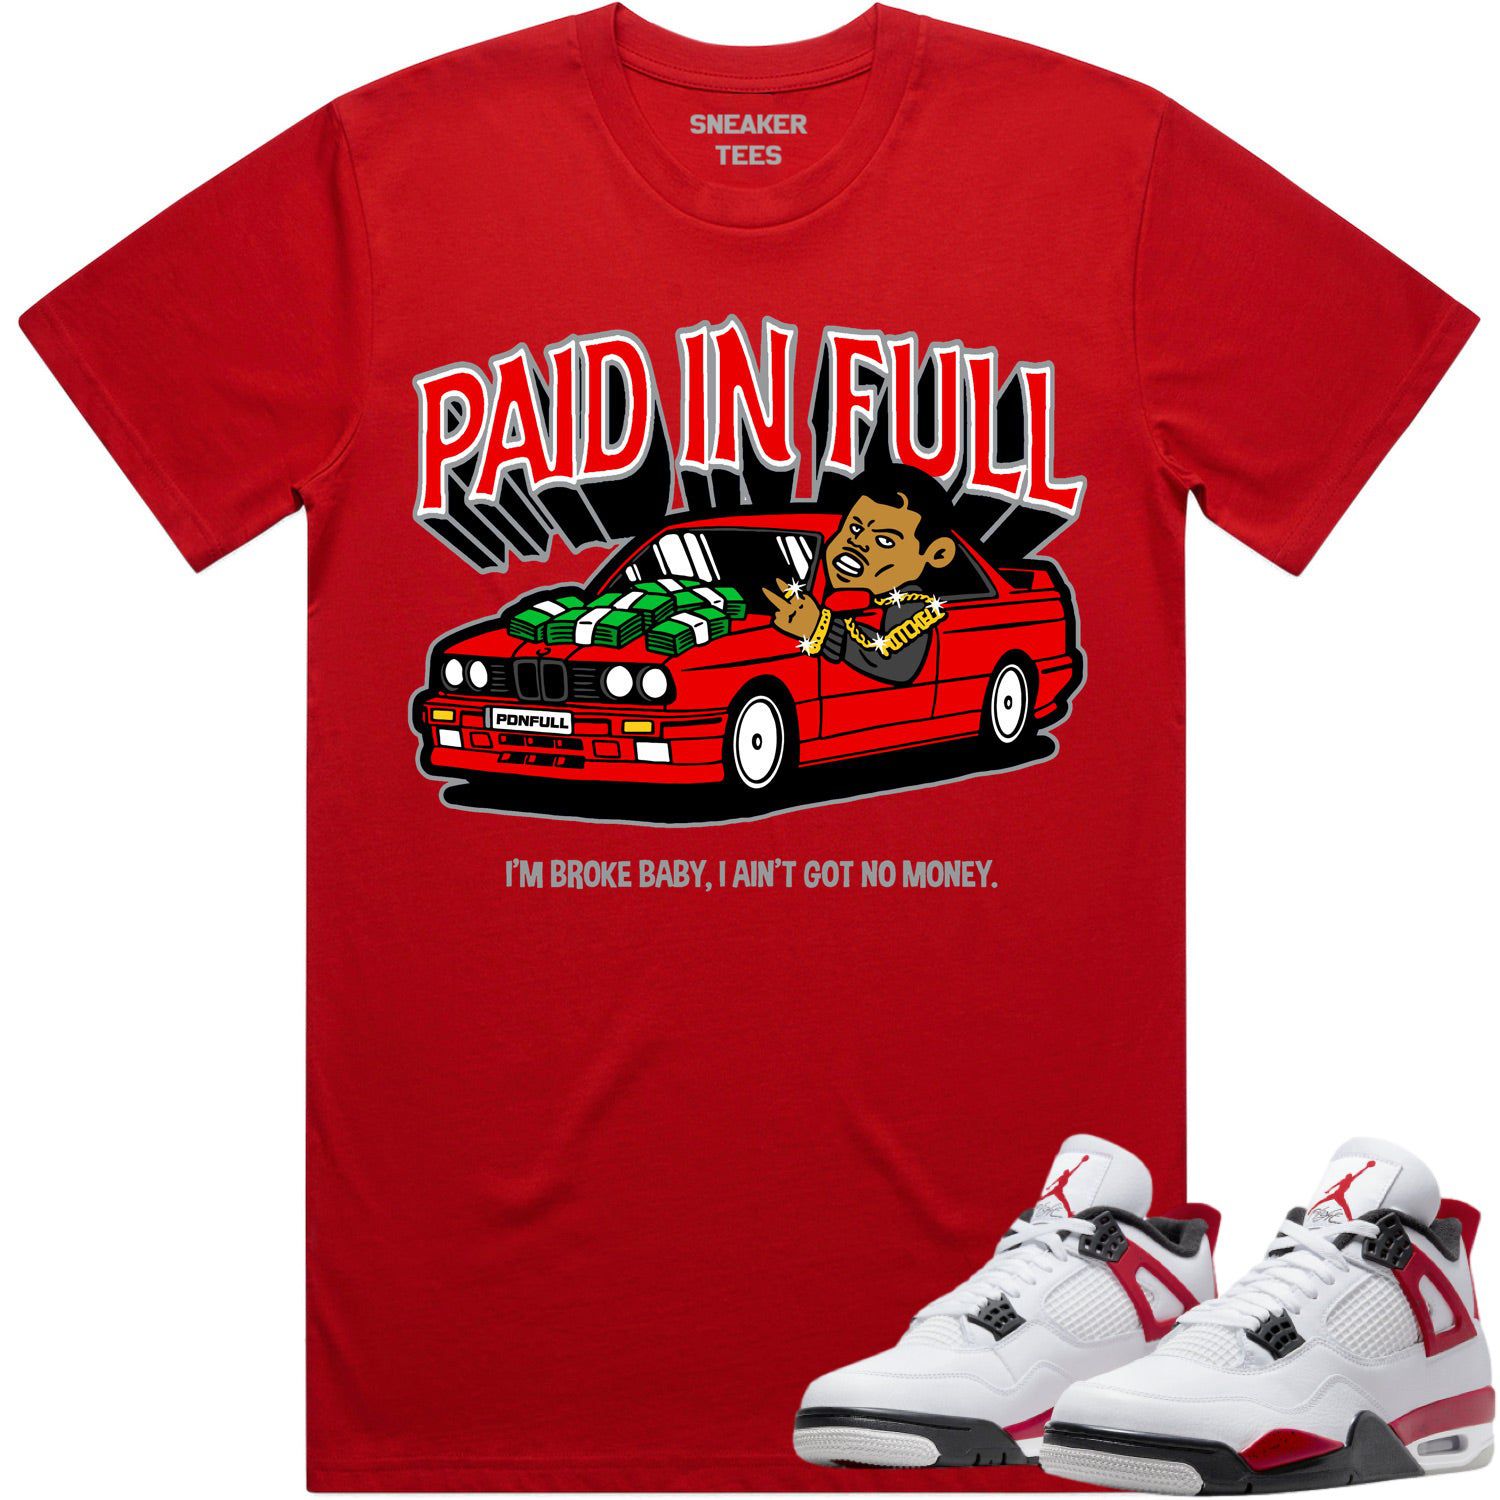 Red Cement 4s Shirt - Jordan Retro 4 Red Cement Shirts - Red Paid